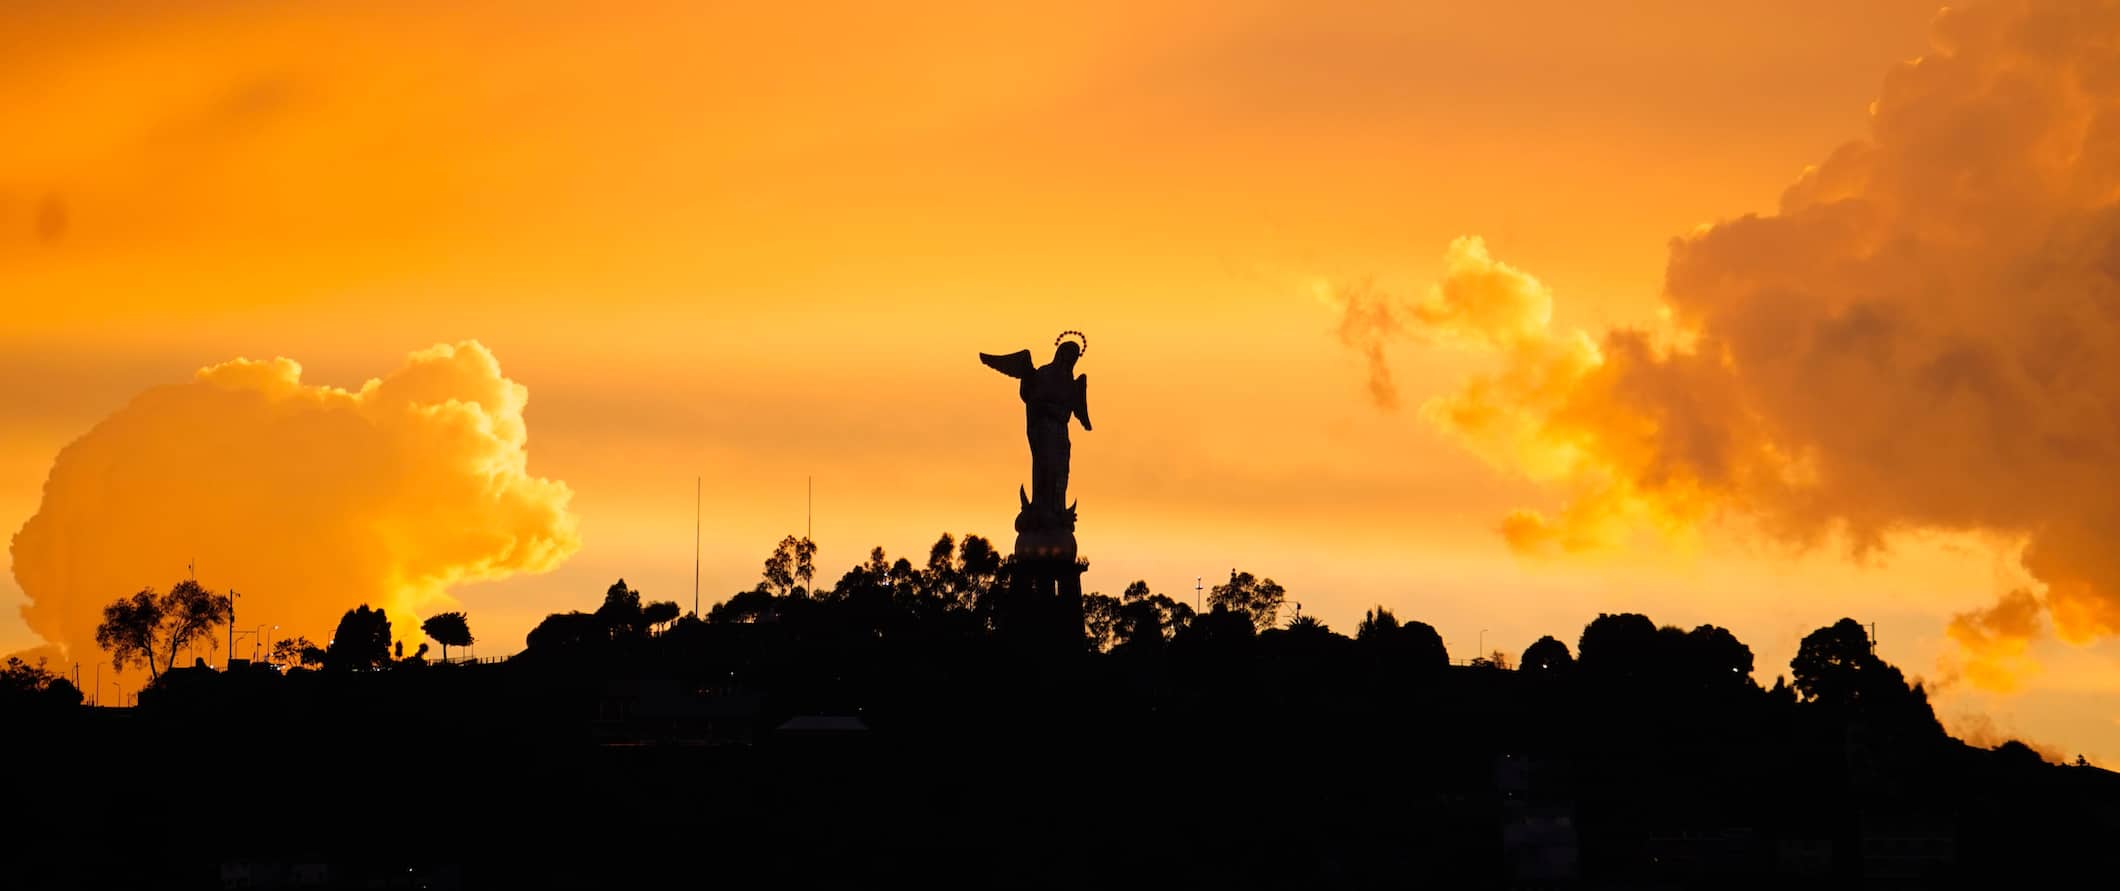 A statue on a hill silhouetted during a brilliant orange sunset